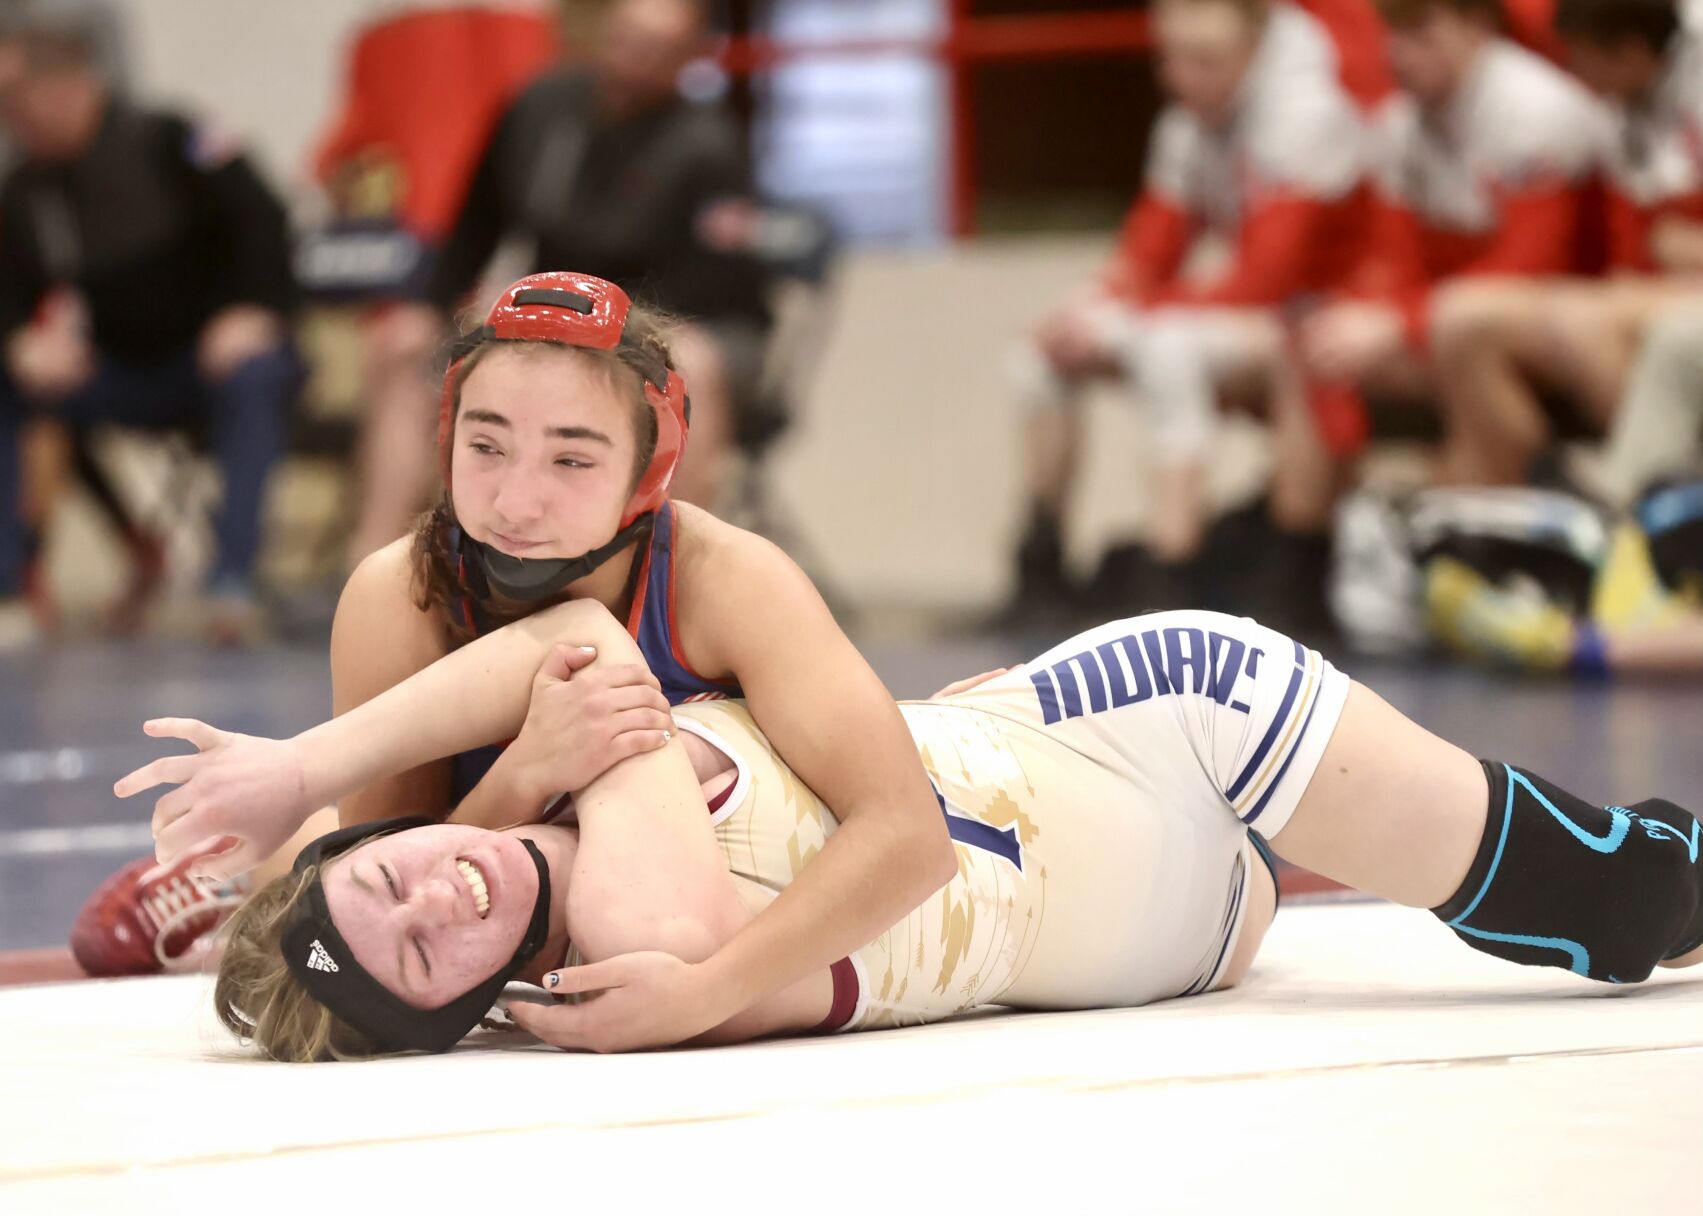 High school wrestling district competition to kick off Preps idahostatejournal image